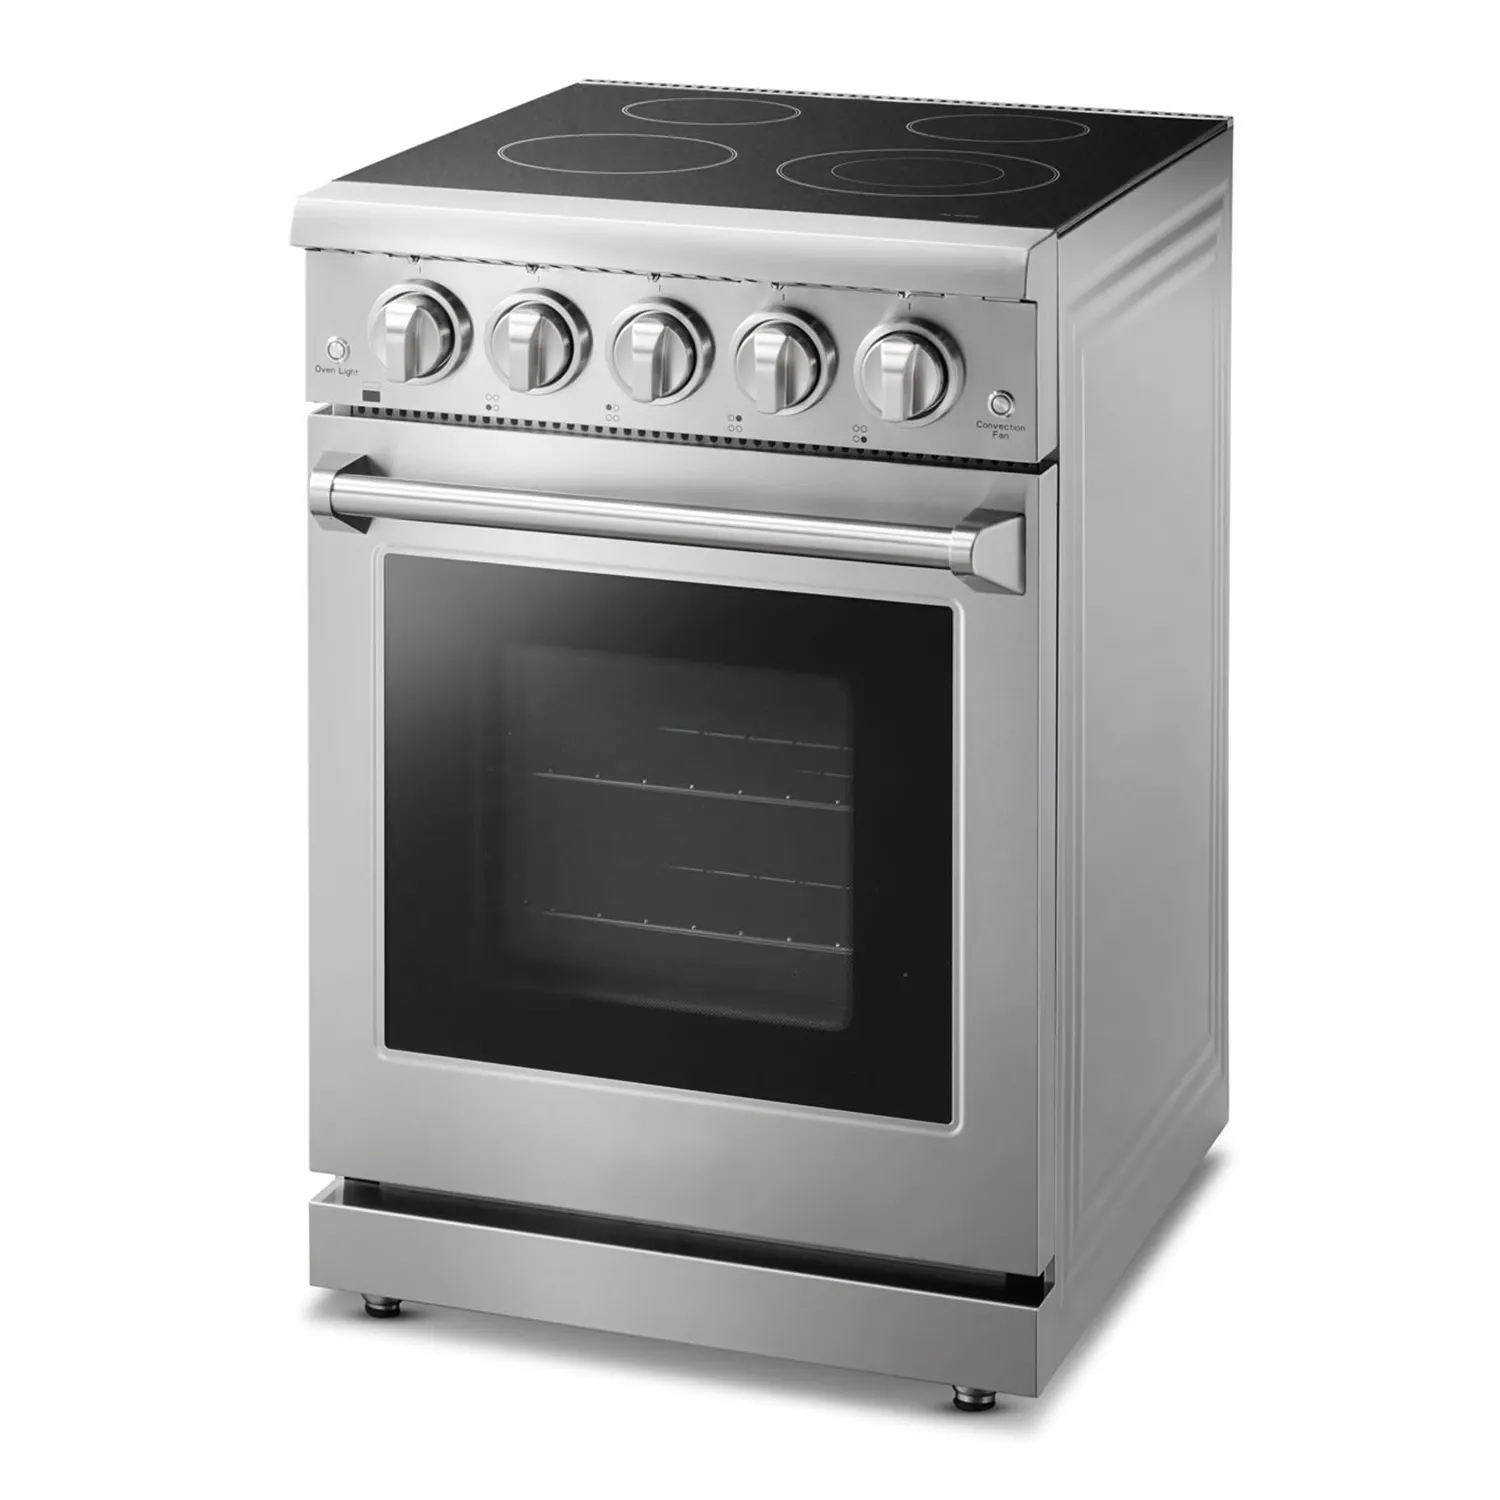 Stainless Steel factory 24 inch Electric Range